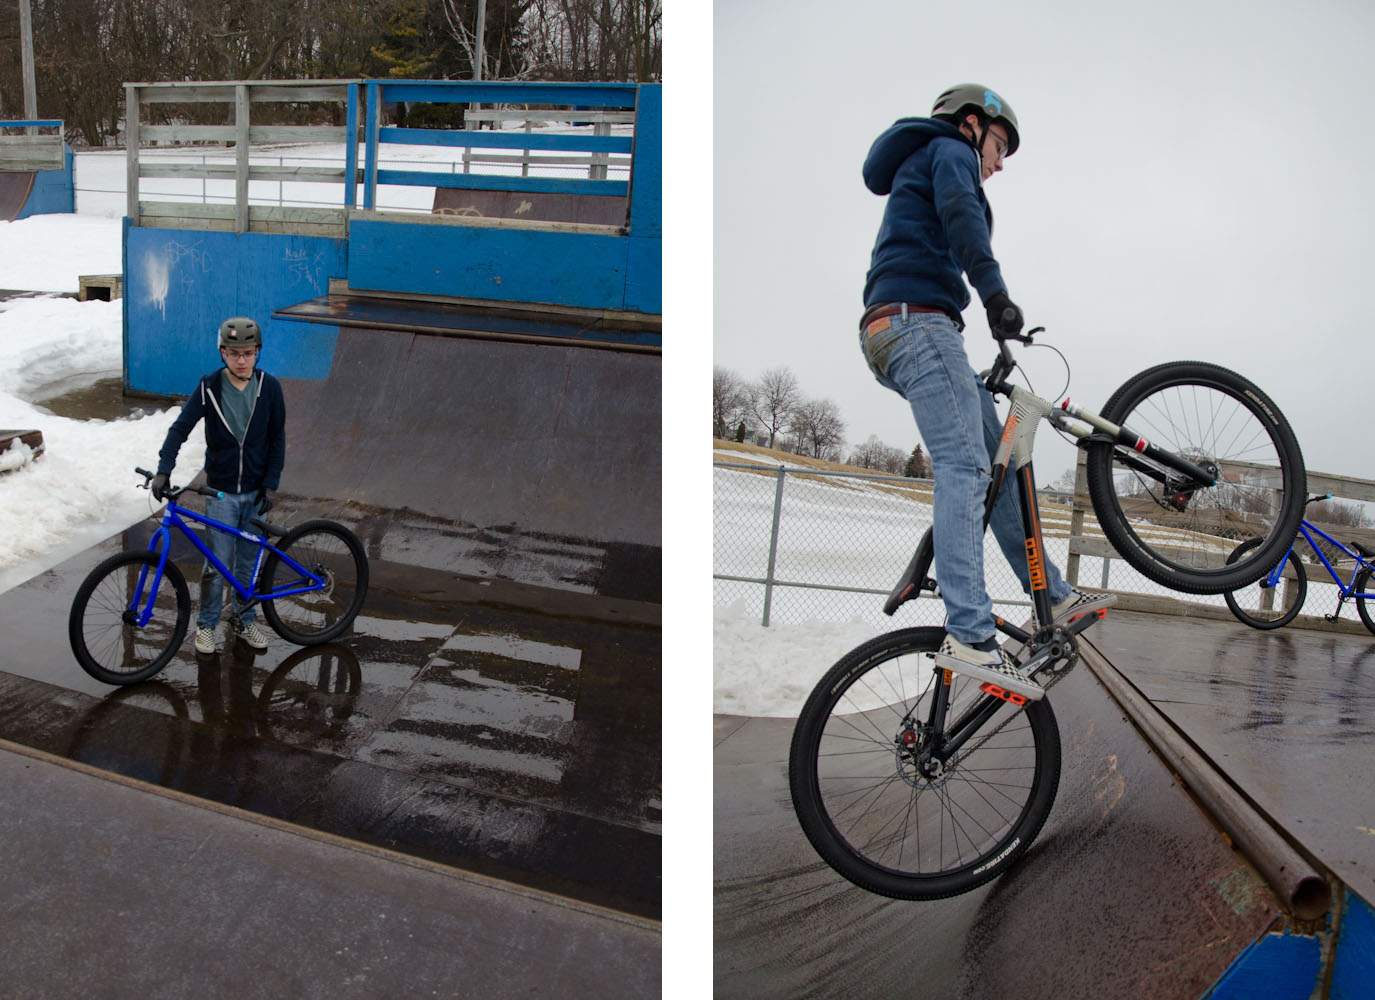 Anthony riding his bike in a wet metal half-pipe